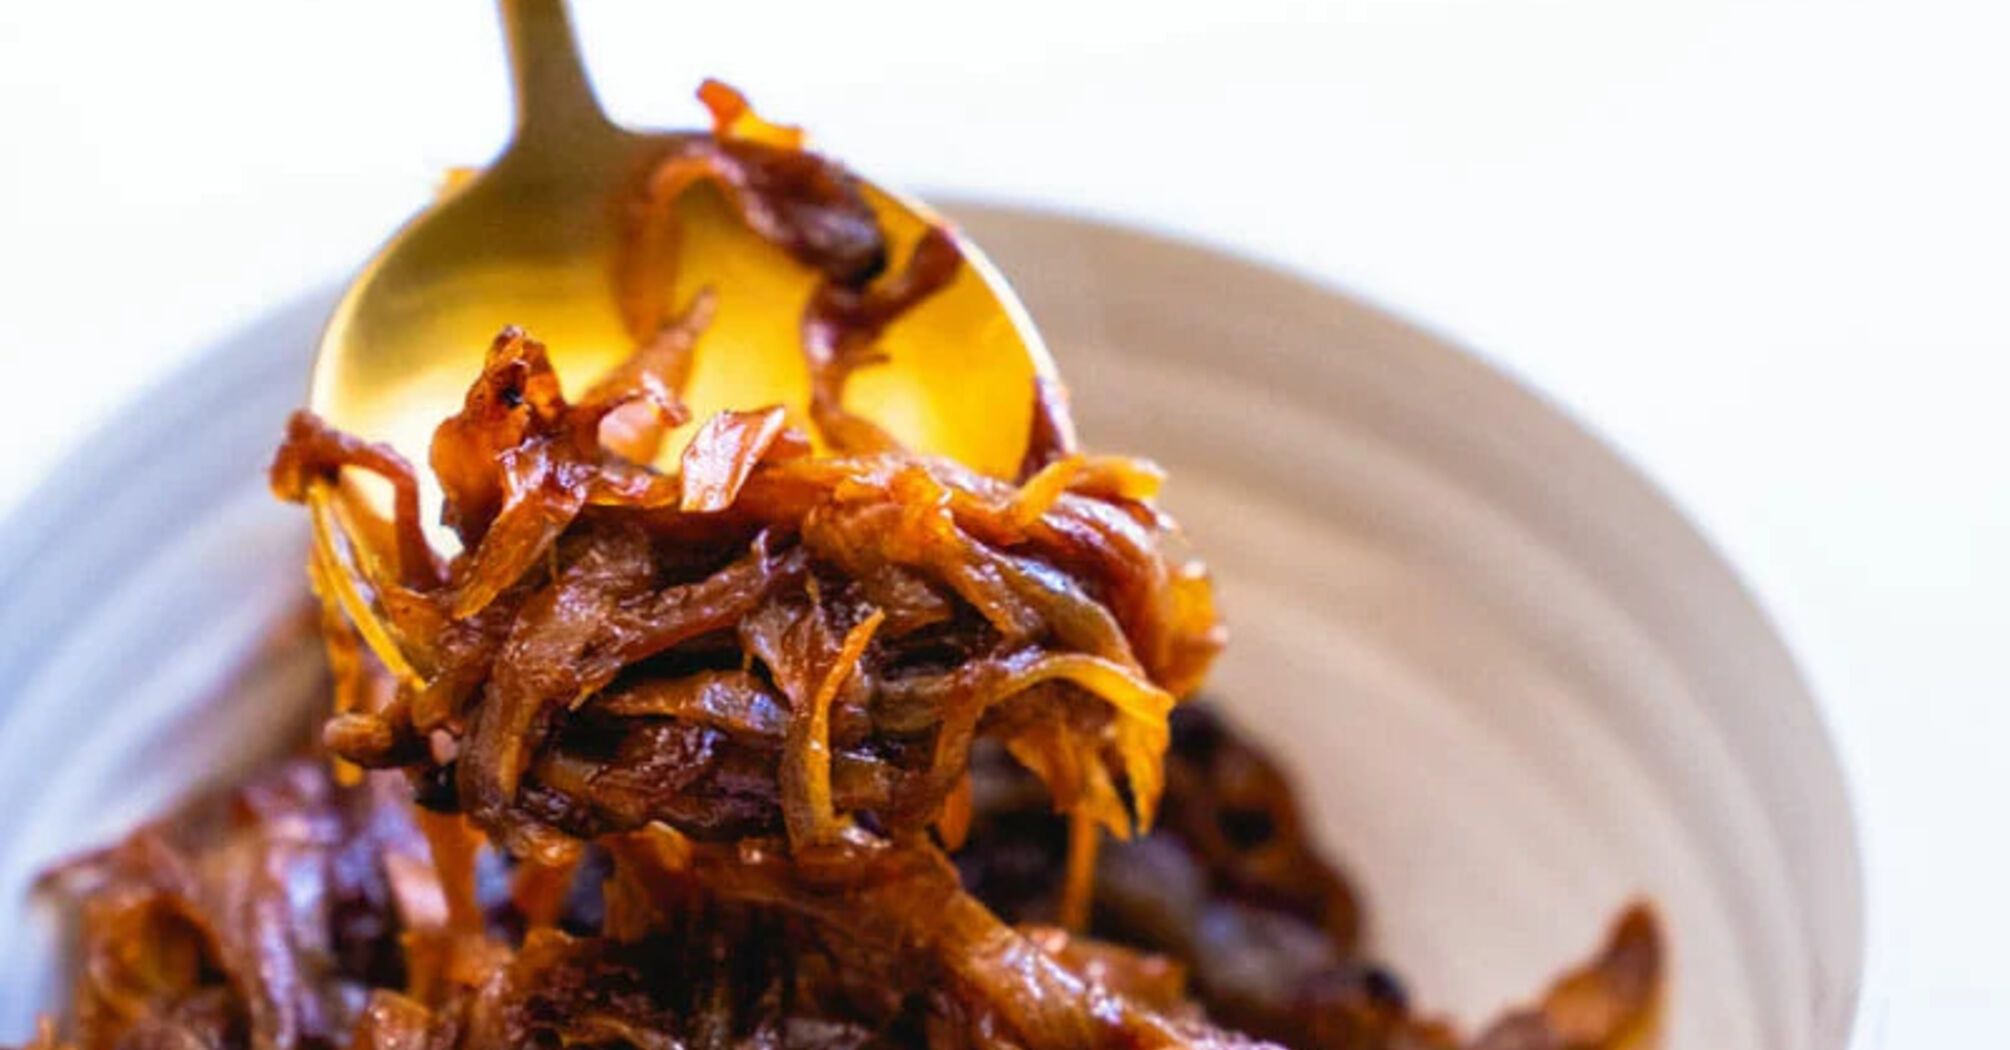 How to cook caramelized onions